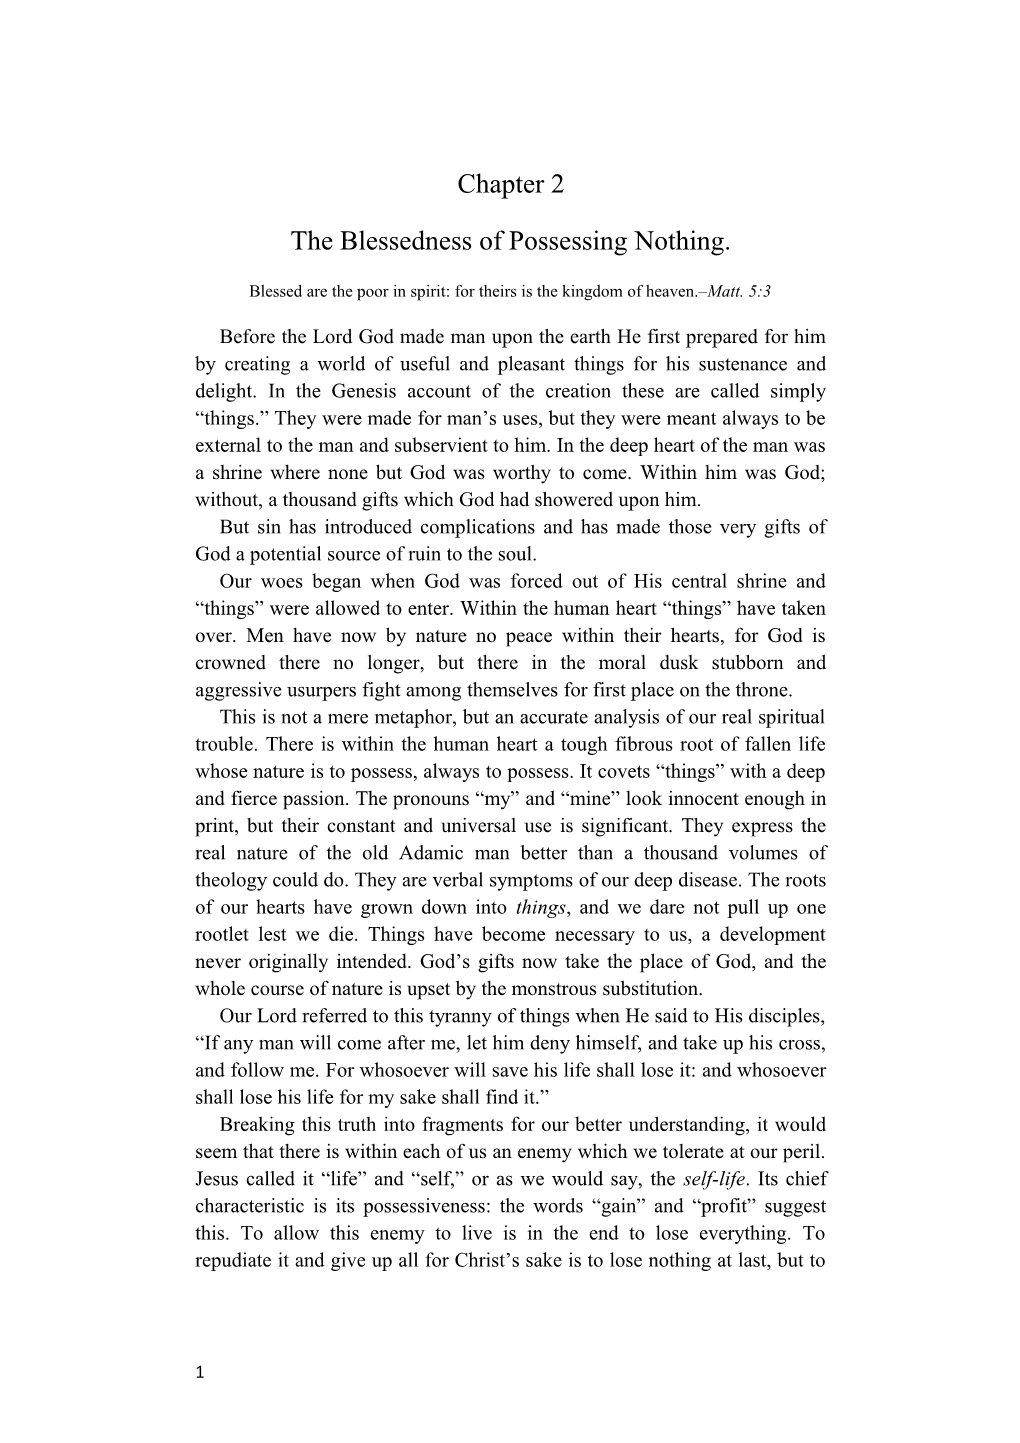 The Blessedness of Possessing Nothing